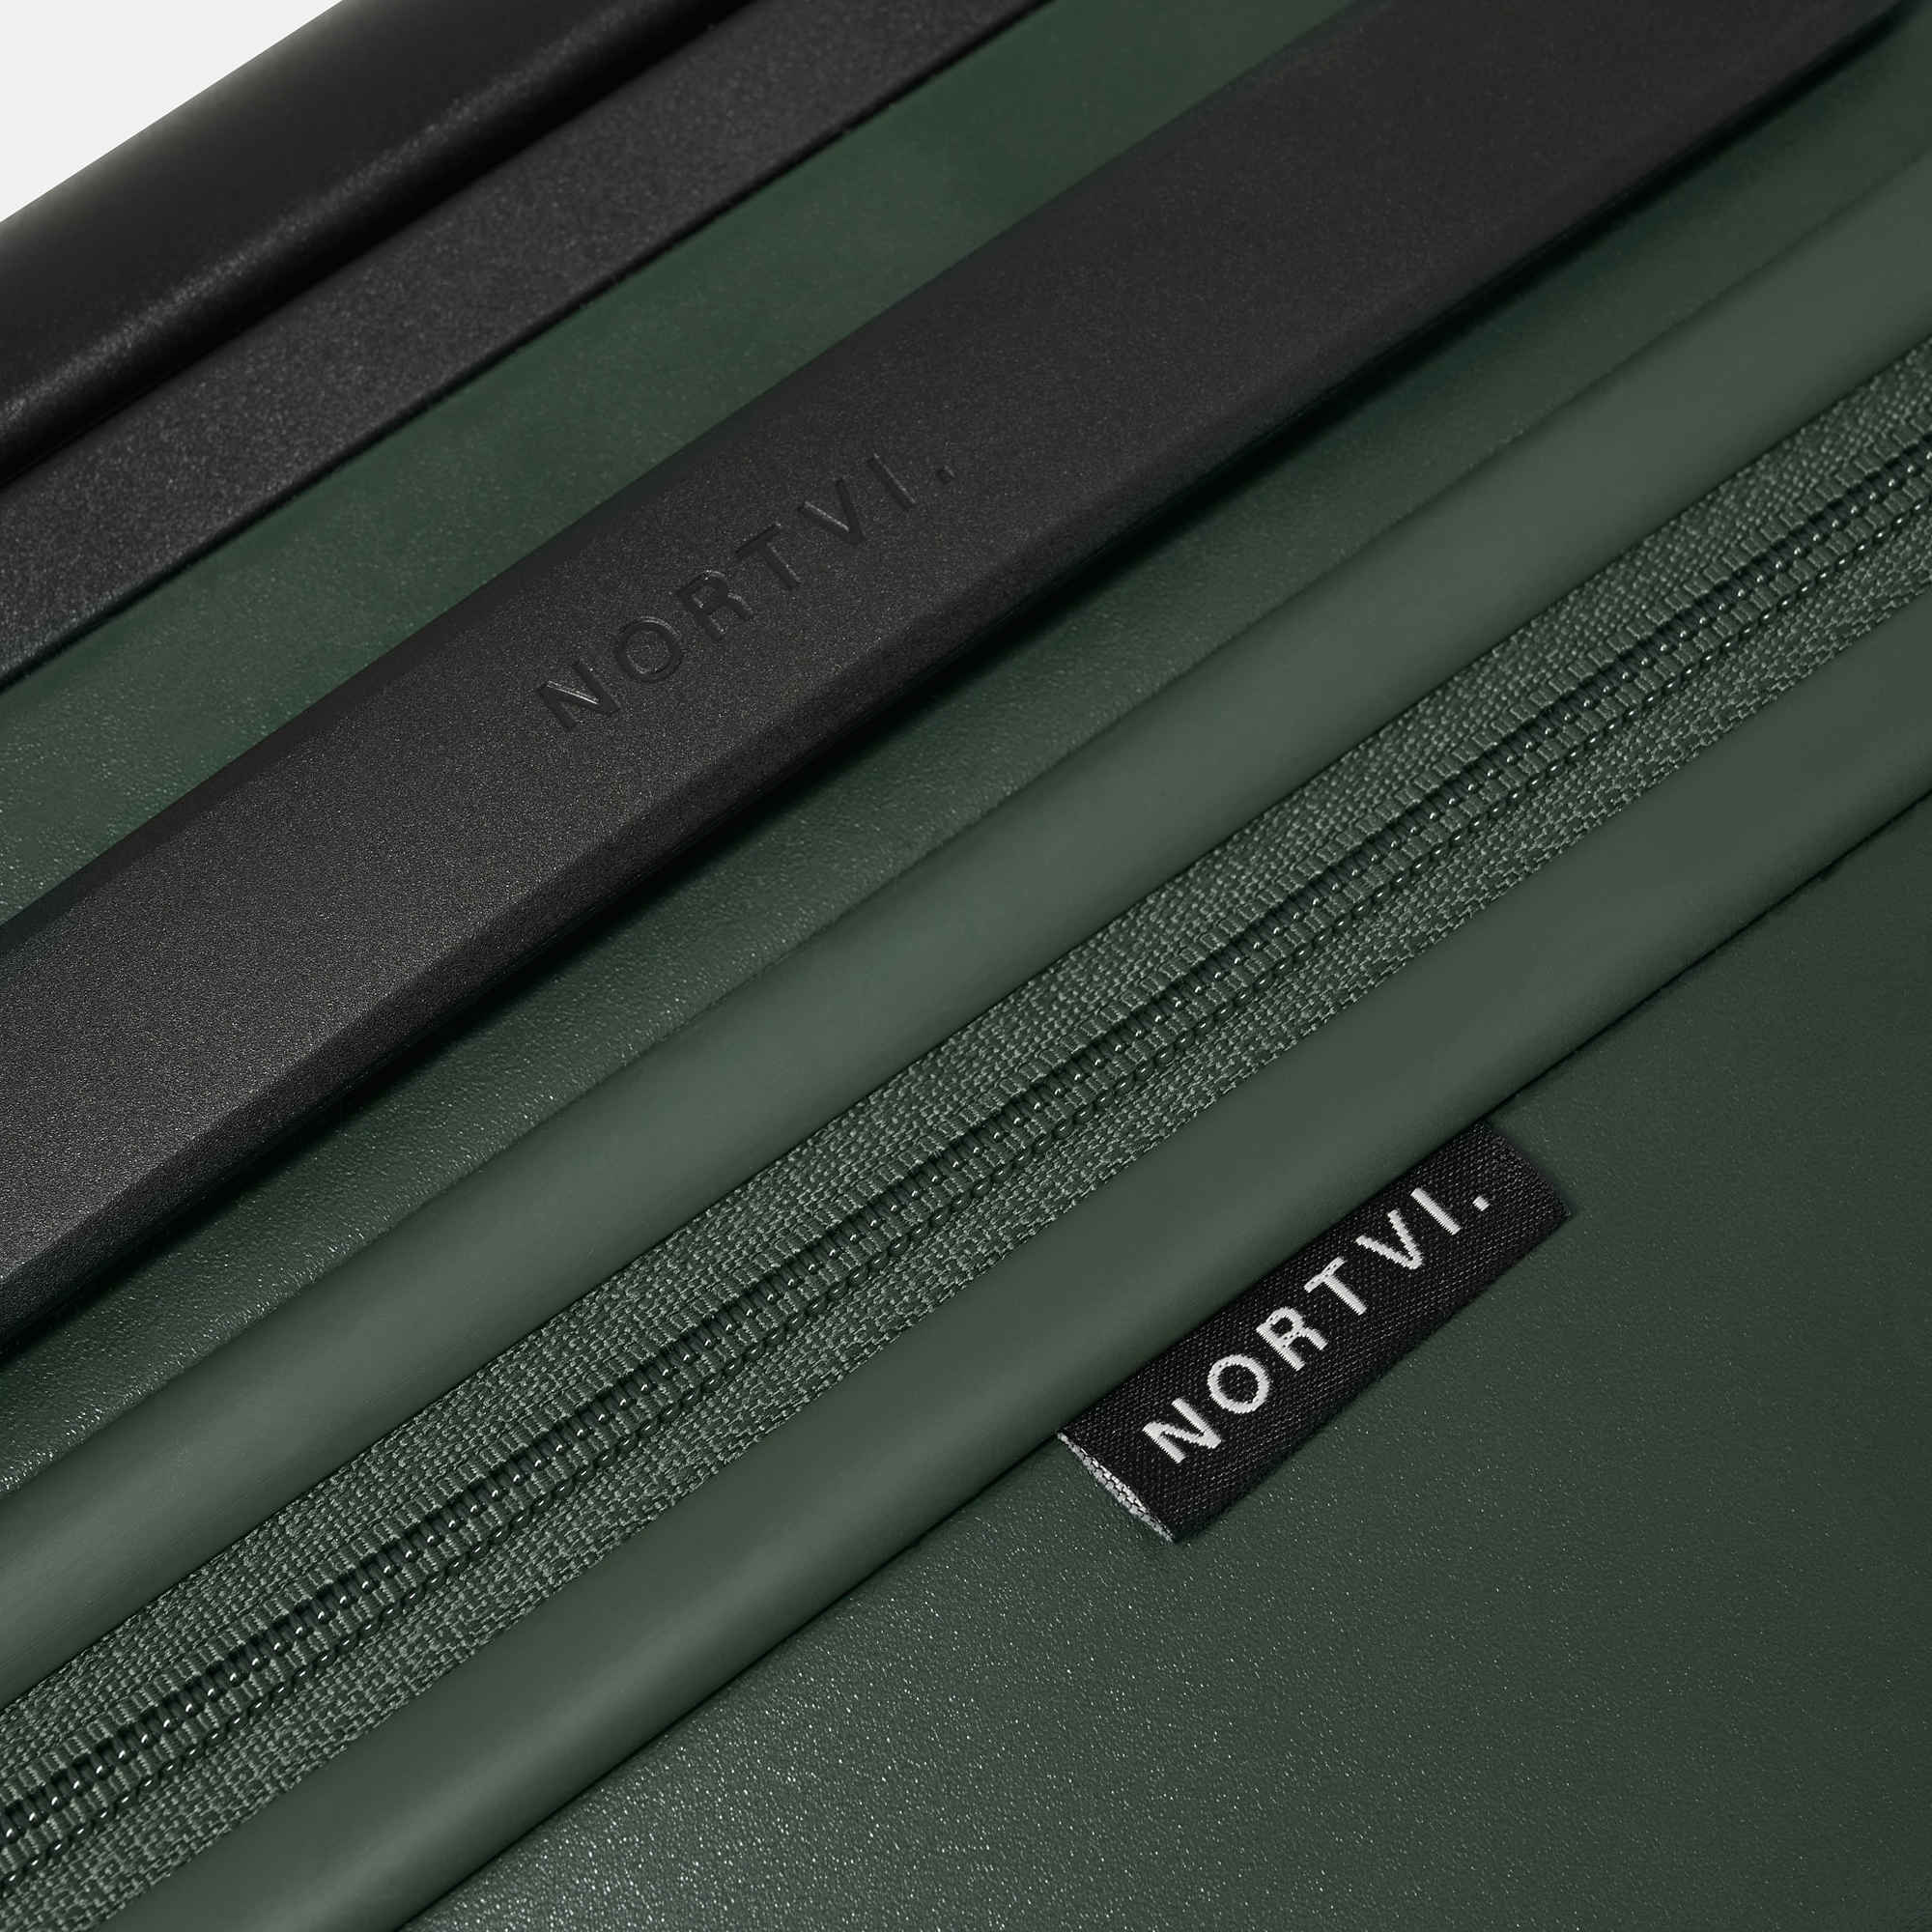 NORTVI sustainable design suitcase green made of durable material.